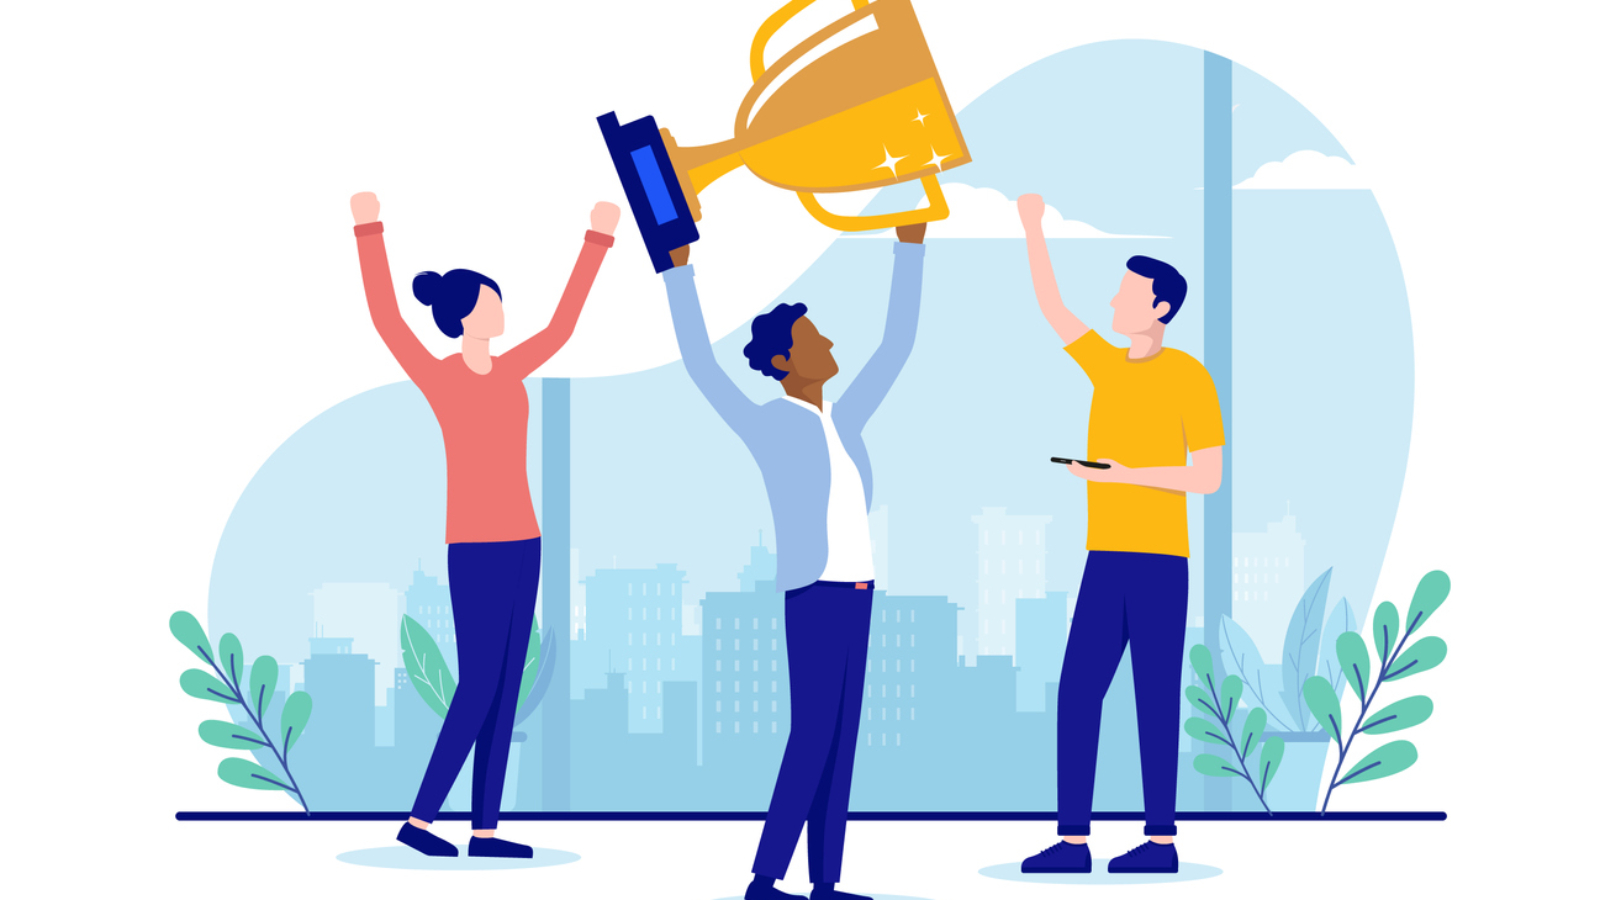 Businesspeople cheering and winning trophy with hands in air. Winners and success concept. Flat design vector illustration with white background